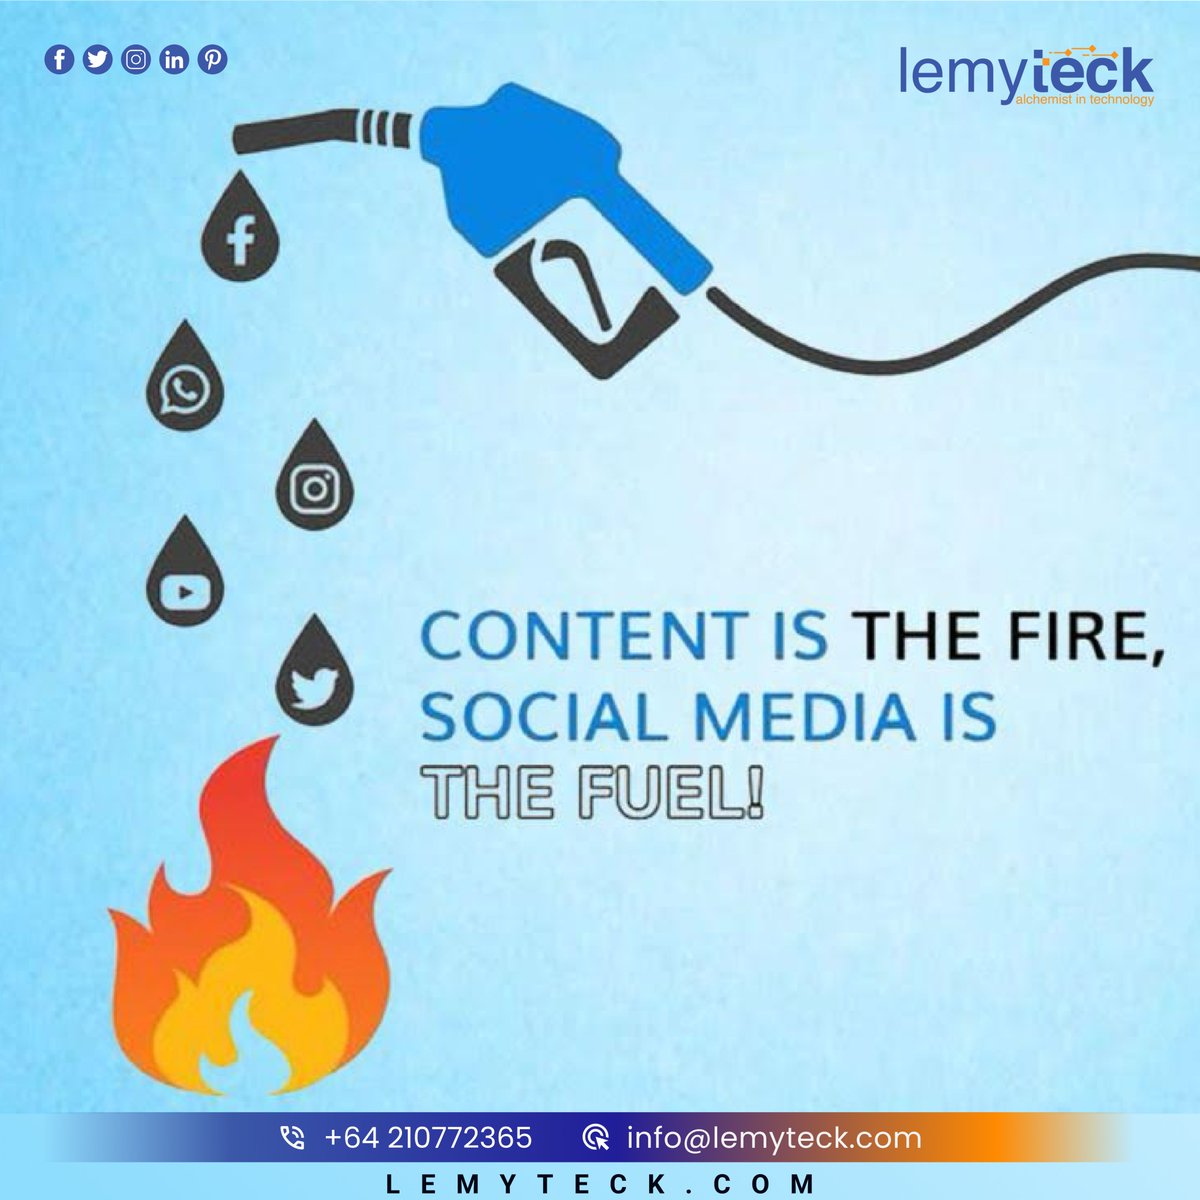 Content sparks like fire🔥, fueled by social media!⛽️ Drive success with captivating content and strategic tactics. For digital dominance. contact us: +64 210772365 or visit 🌐 lemyteck.com #lemyteck #ContentCreation #SocialMedia #DigitalStrategy #aucklandnz